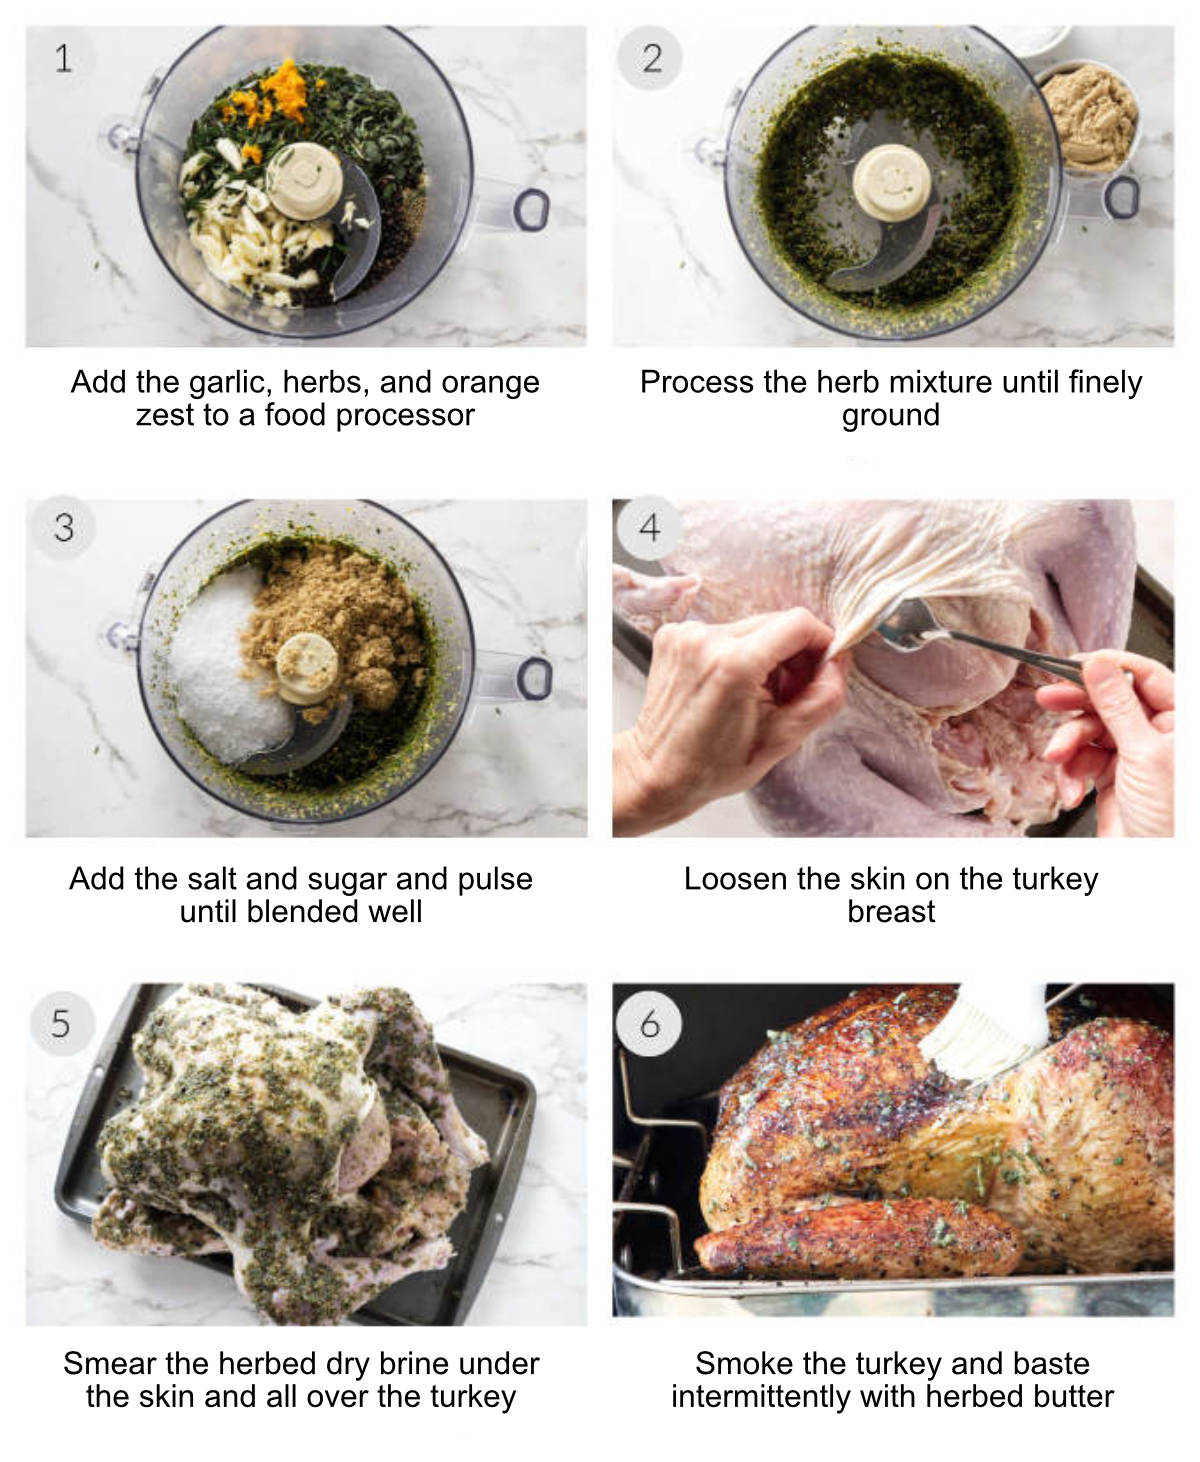 Showing how to make a dry brine smoked turkey, first making the dry brine, then smearing the brine on the turkey, and finally basting it while it smokes.